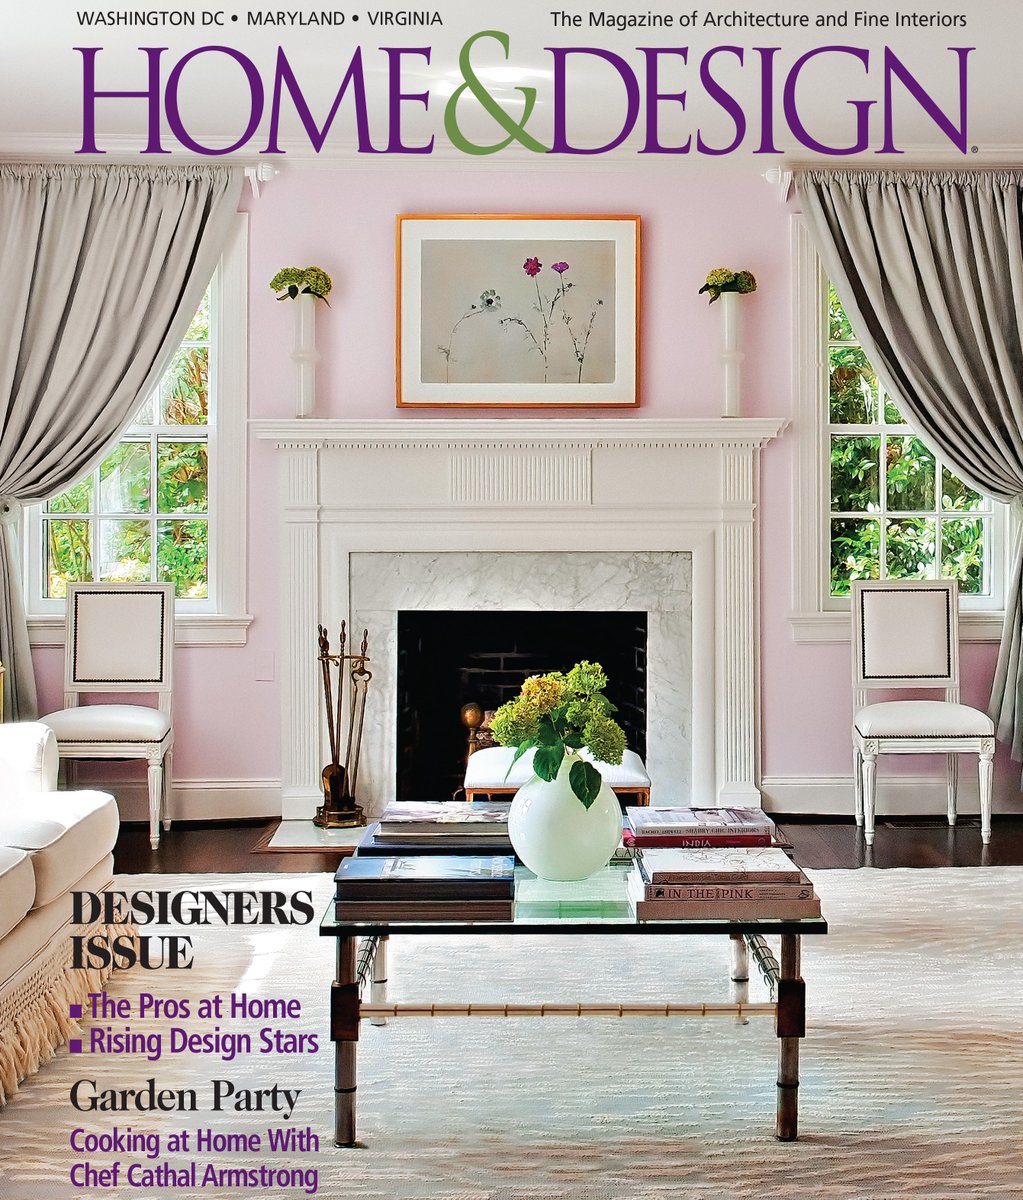 Celebrating 25 Years of Fine Design⁠
⁠
A Classic Cover From Home & Design from 13 years ago⁠
⁠
Article: 'An Airy Oasis'⁠
⁠
Interior Design: Andrews Designs
Renovation Architecture:  3North 
Reno Contractor: Grace Street Construction
📸: Tony Giammarino
⁠
#homeanddesigndc